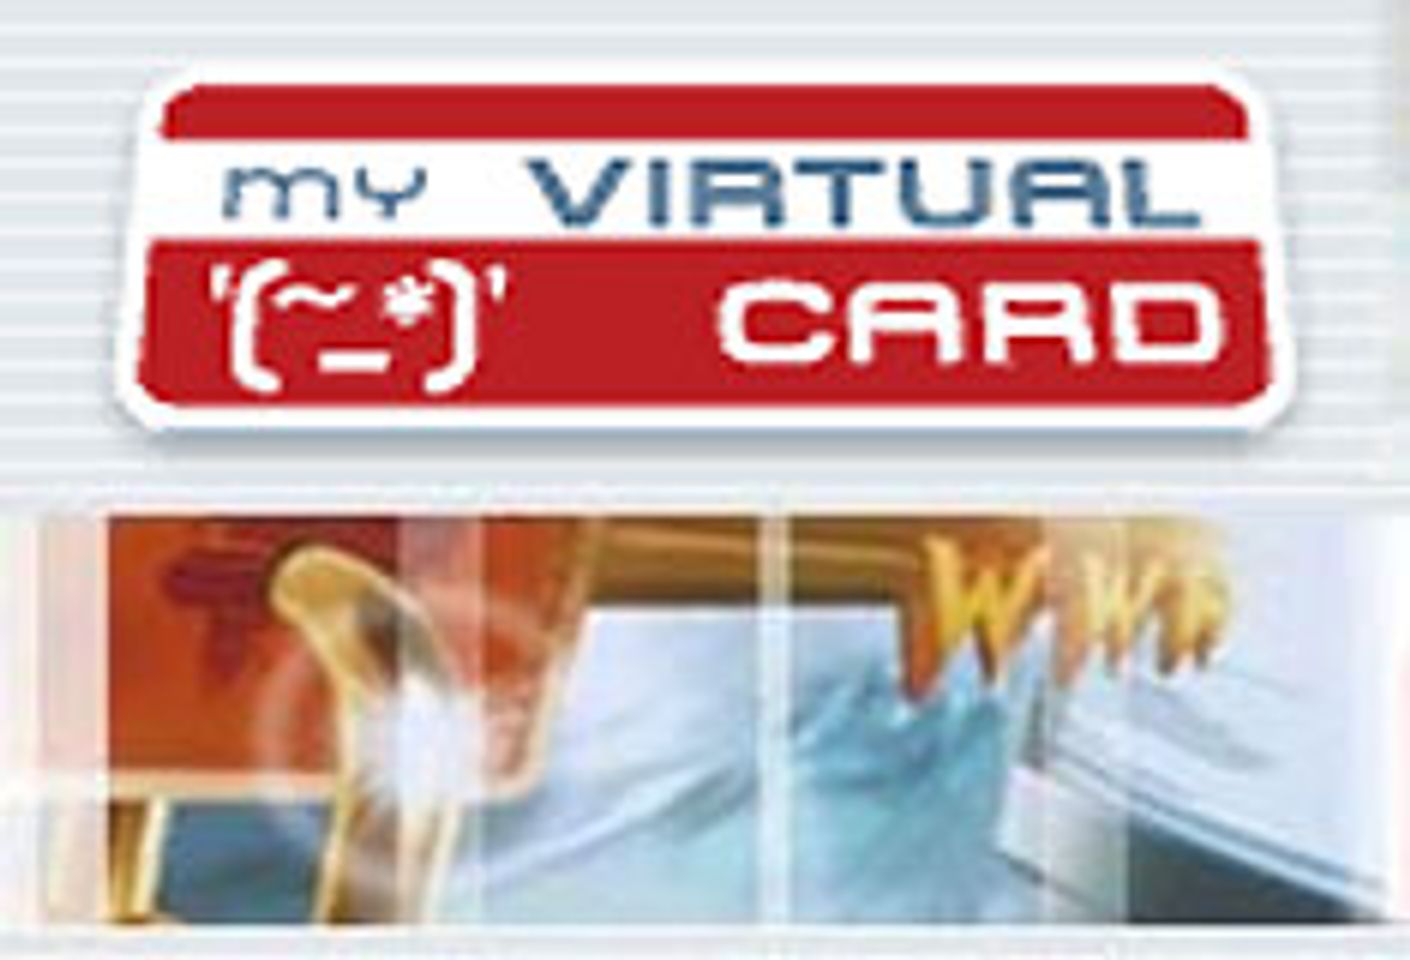 myVirtualCard Offering Two Weeks Free Credit Card Processing